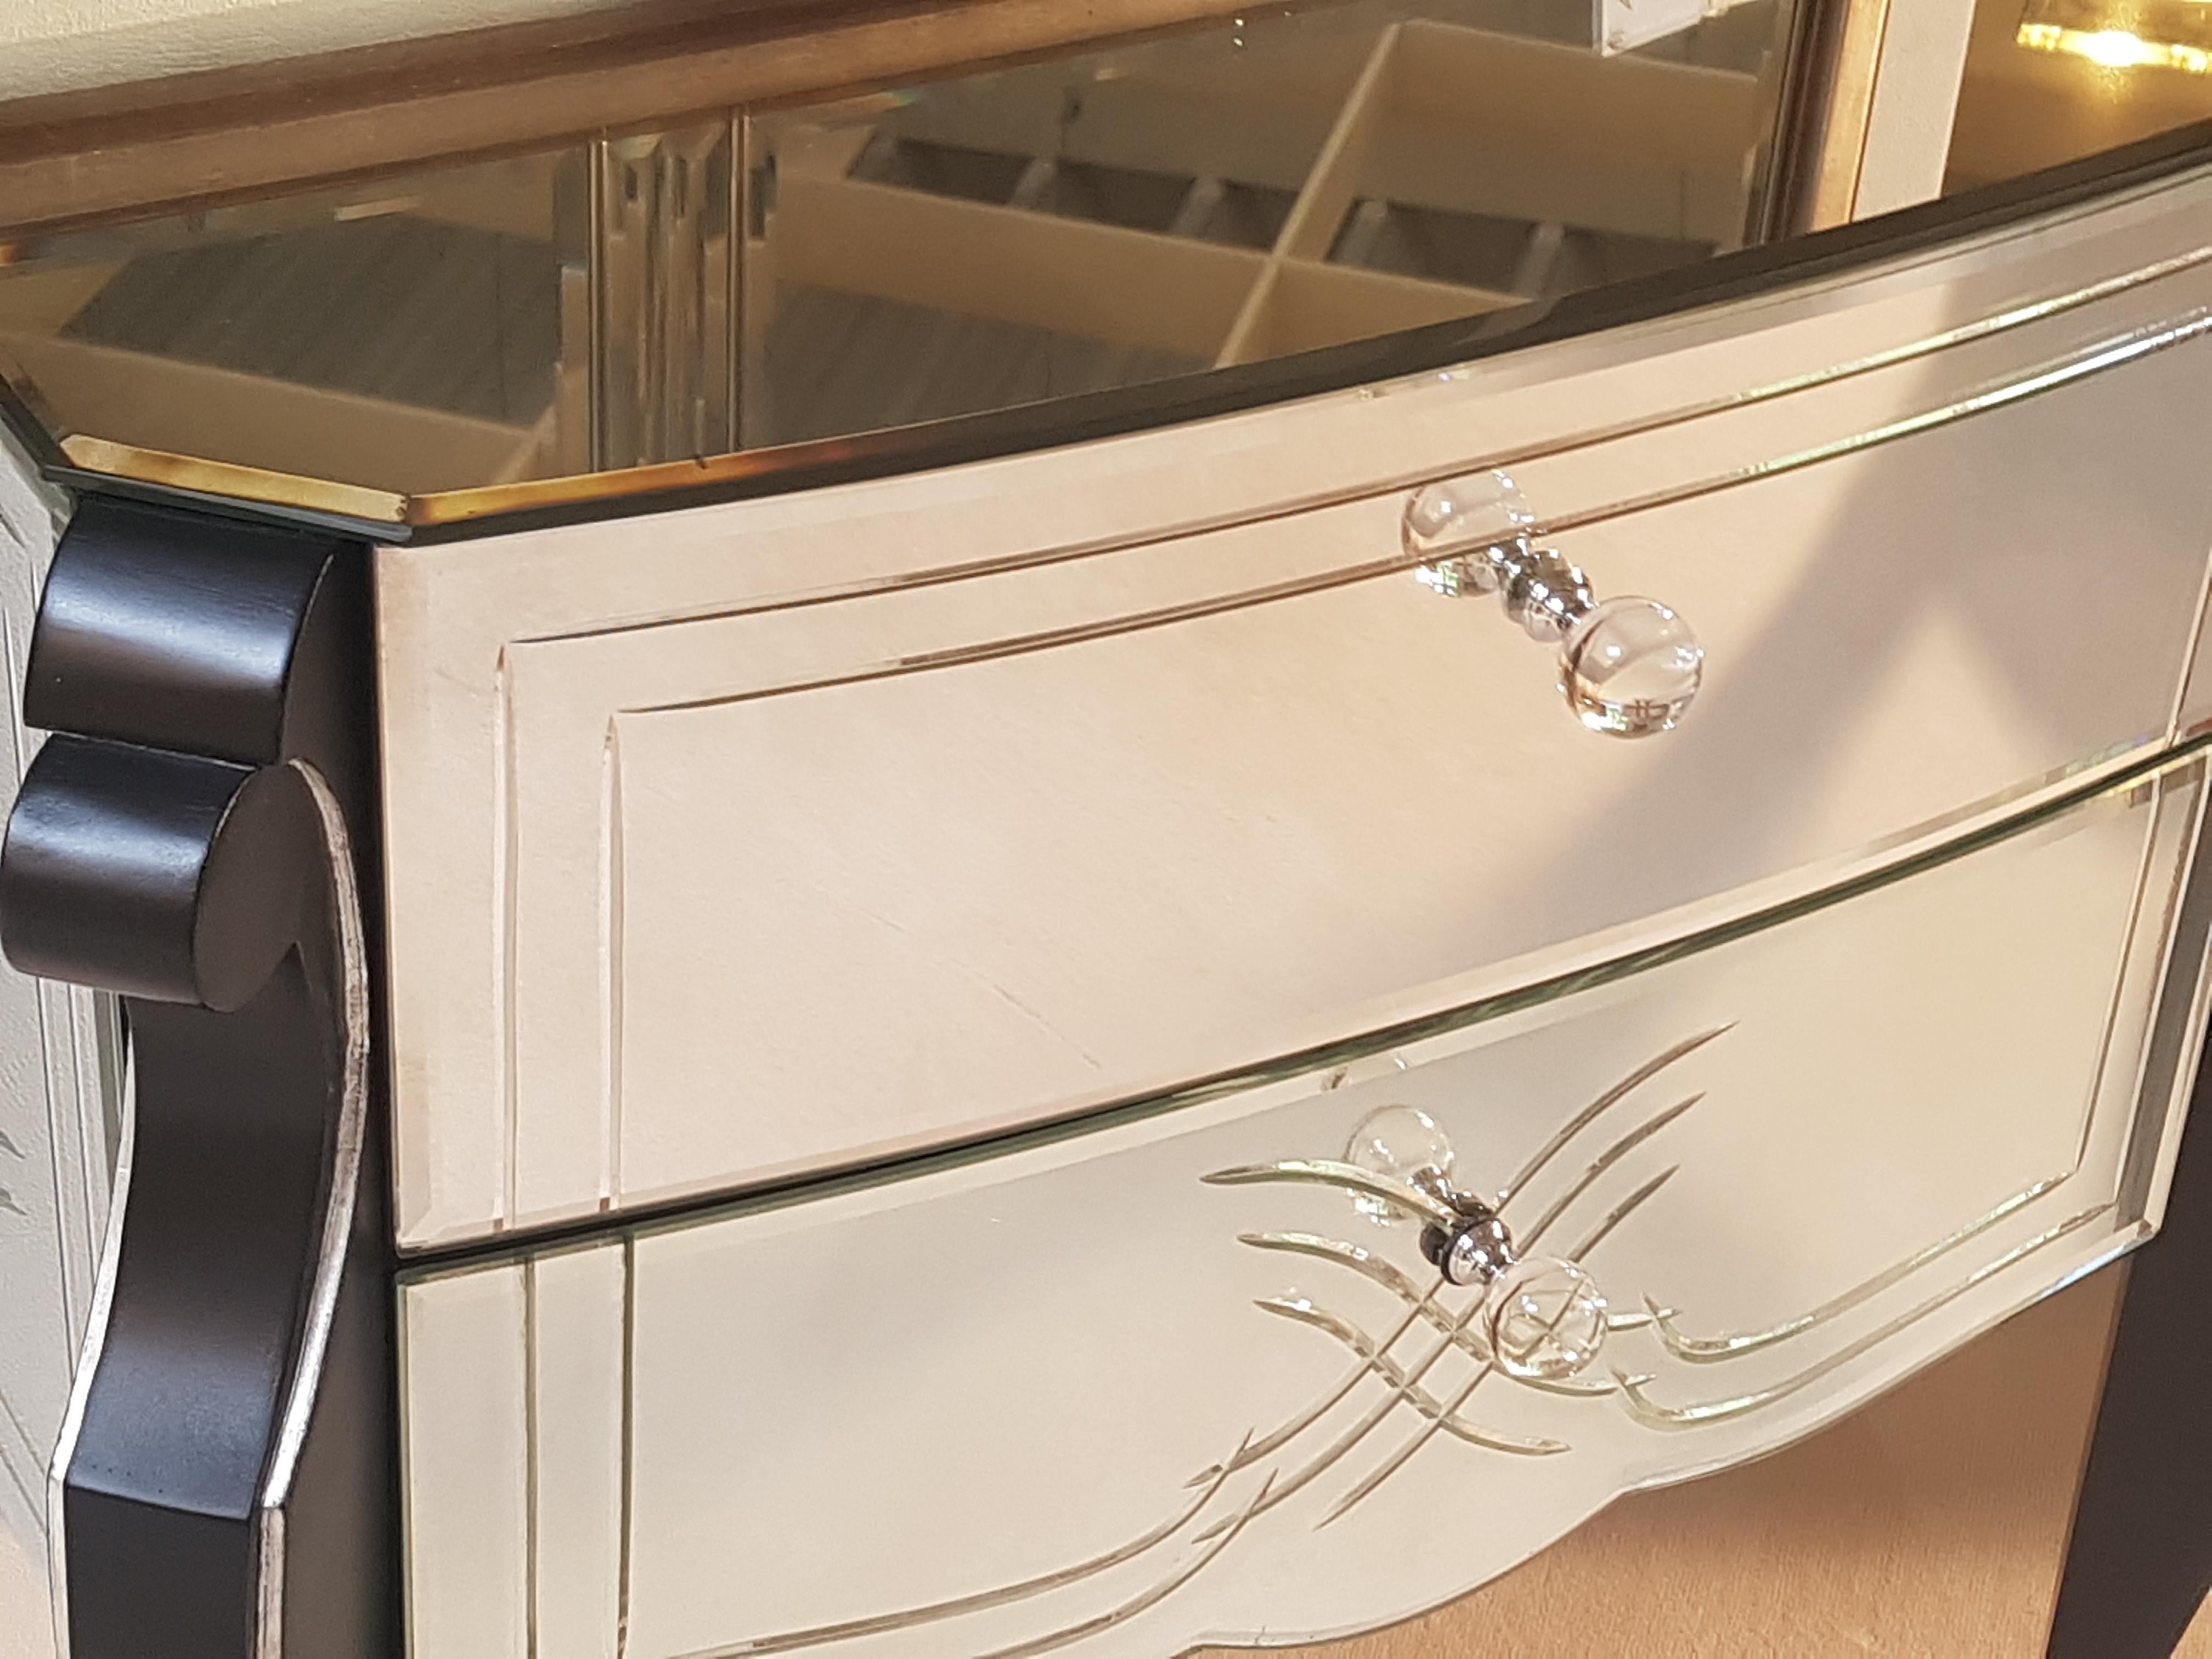 Amazing Italian commode with an all around mirror finish, fine ornamentation details and glass knobs. It features black lacquered curved legs in Biedermeier style with accented chrome bars. The interior of the two storage drawers is also painted